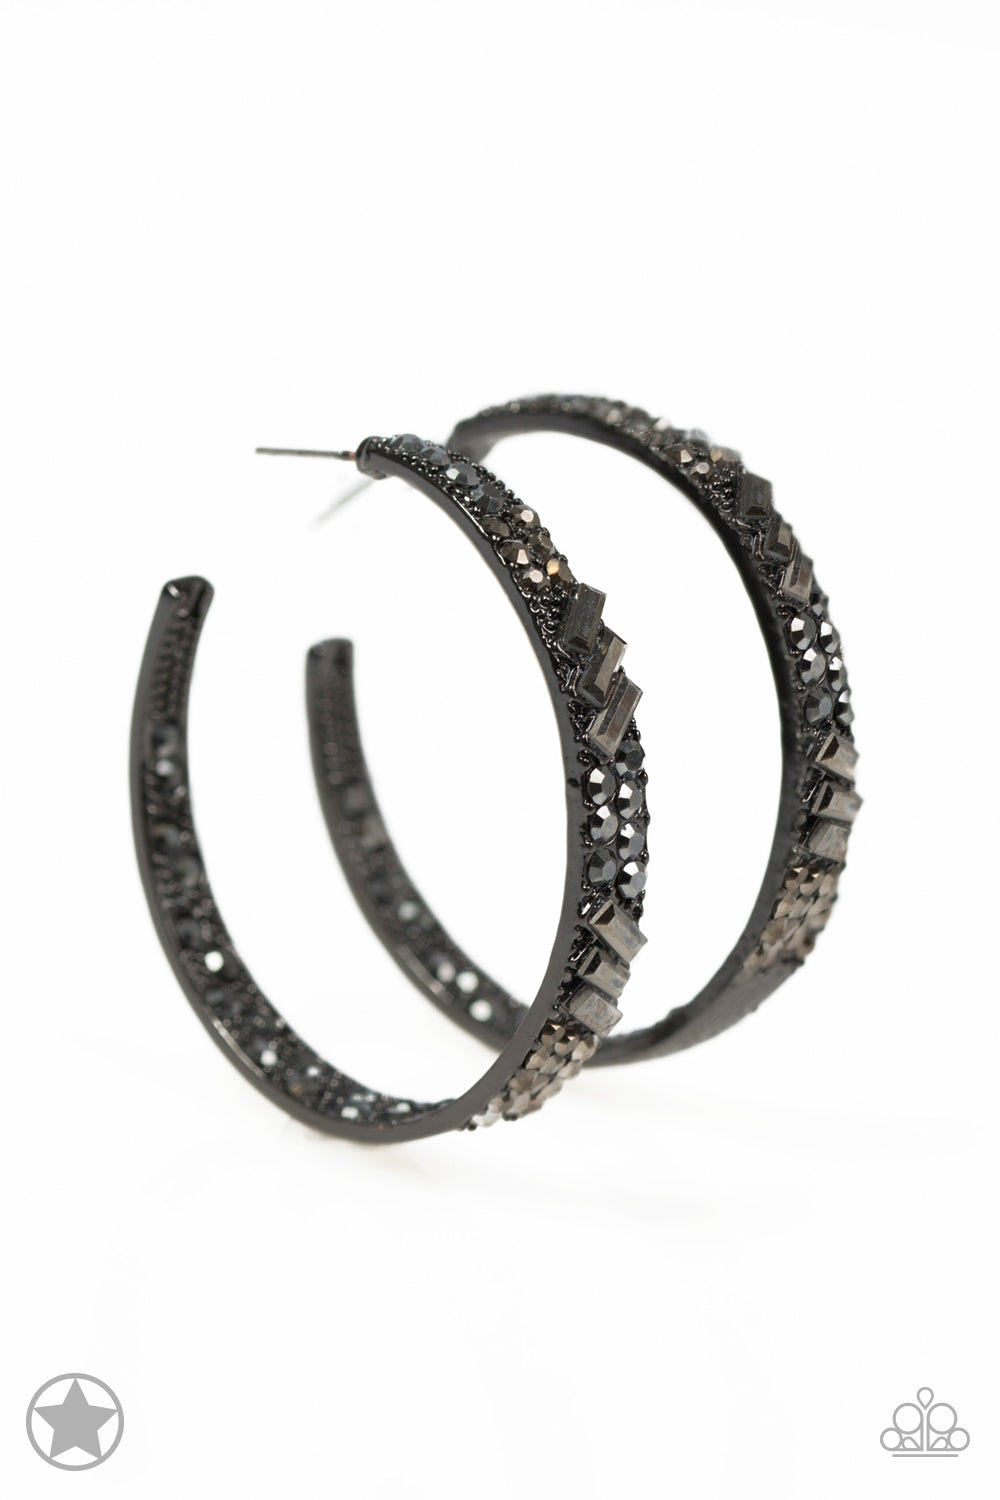 The front facing surface of a chunky gunmetal hoop is dipped in brilliantly sparkling hematite rhinestones while light-catching texture wraps around the back. The interior of the hoop features the opposite pattern, creating the illusion of a full hoop of blinding shimmer. Earring attaches to a standard post fitting. Hoop measures 1 3/4" in diameter.